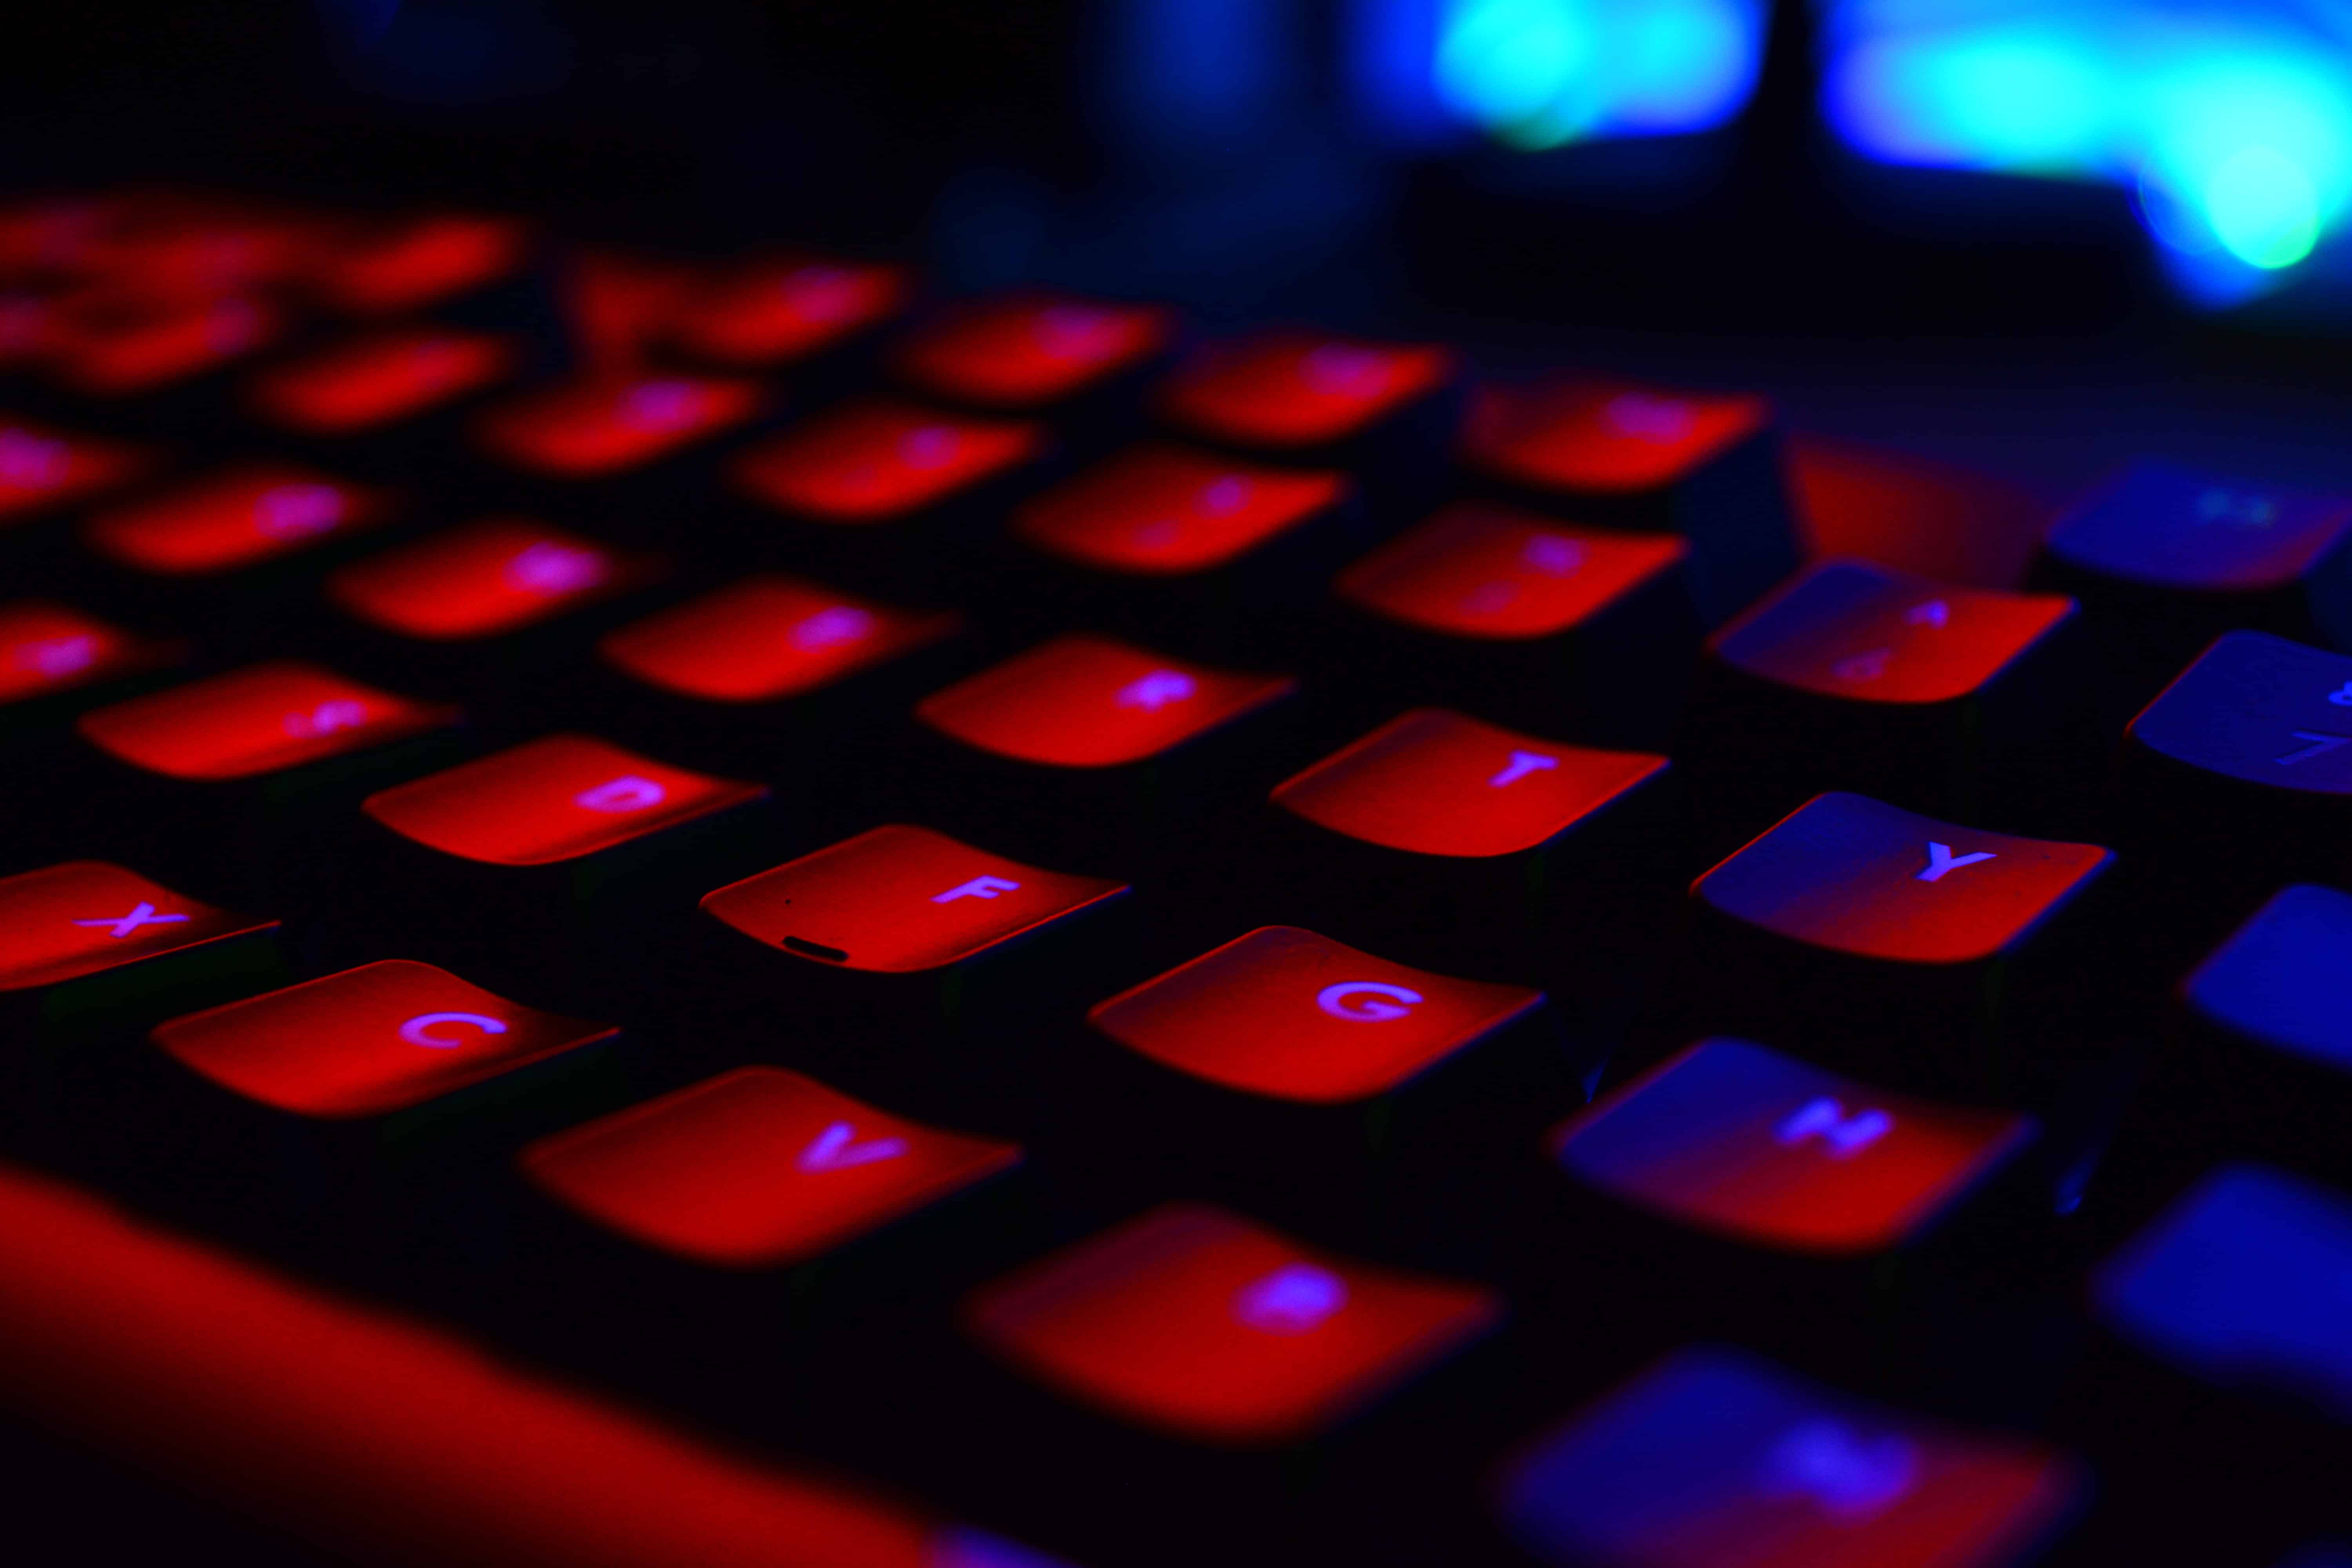 computer keyboard lit in red indicating using the internet for malicious purposes